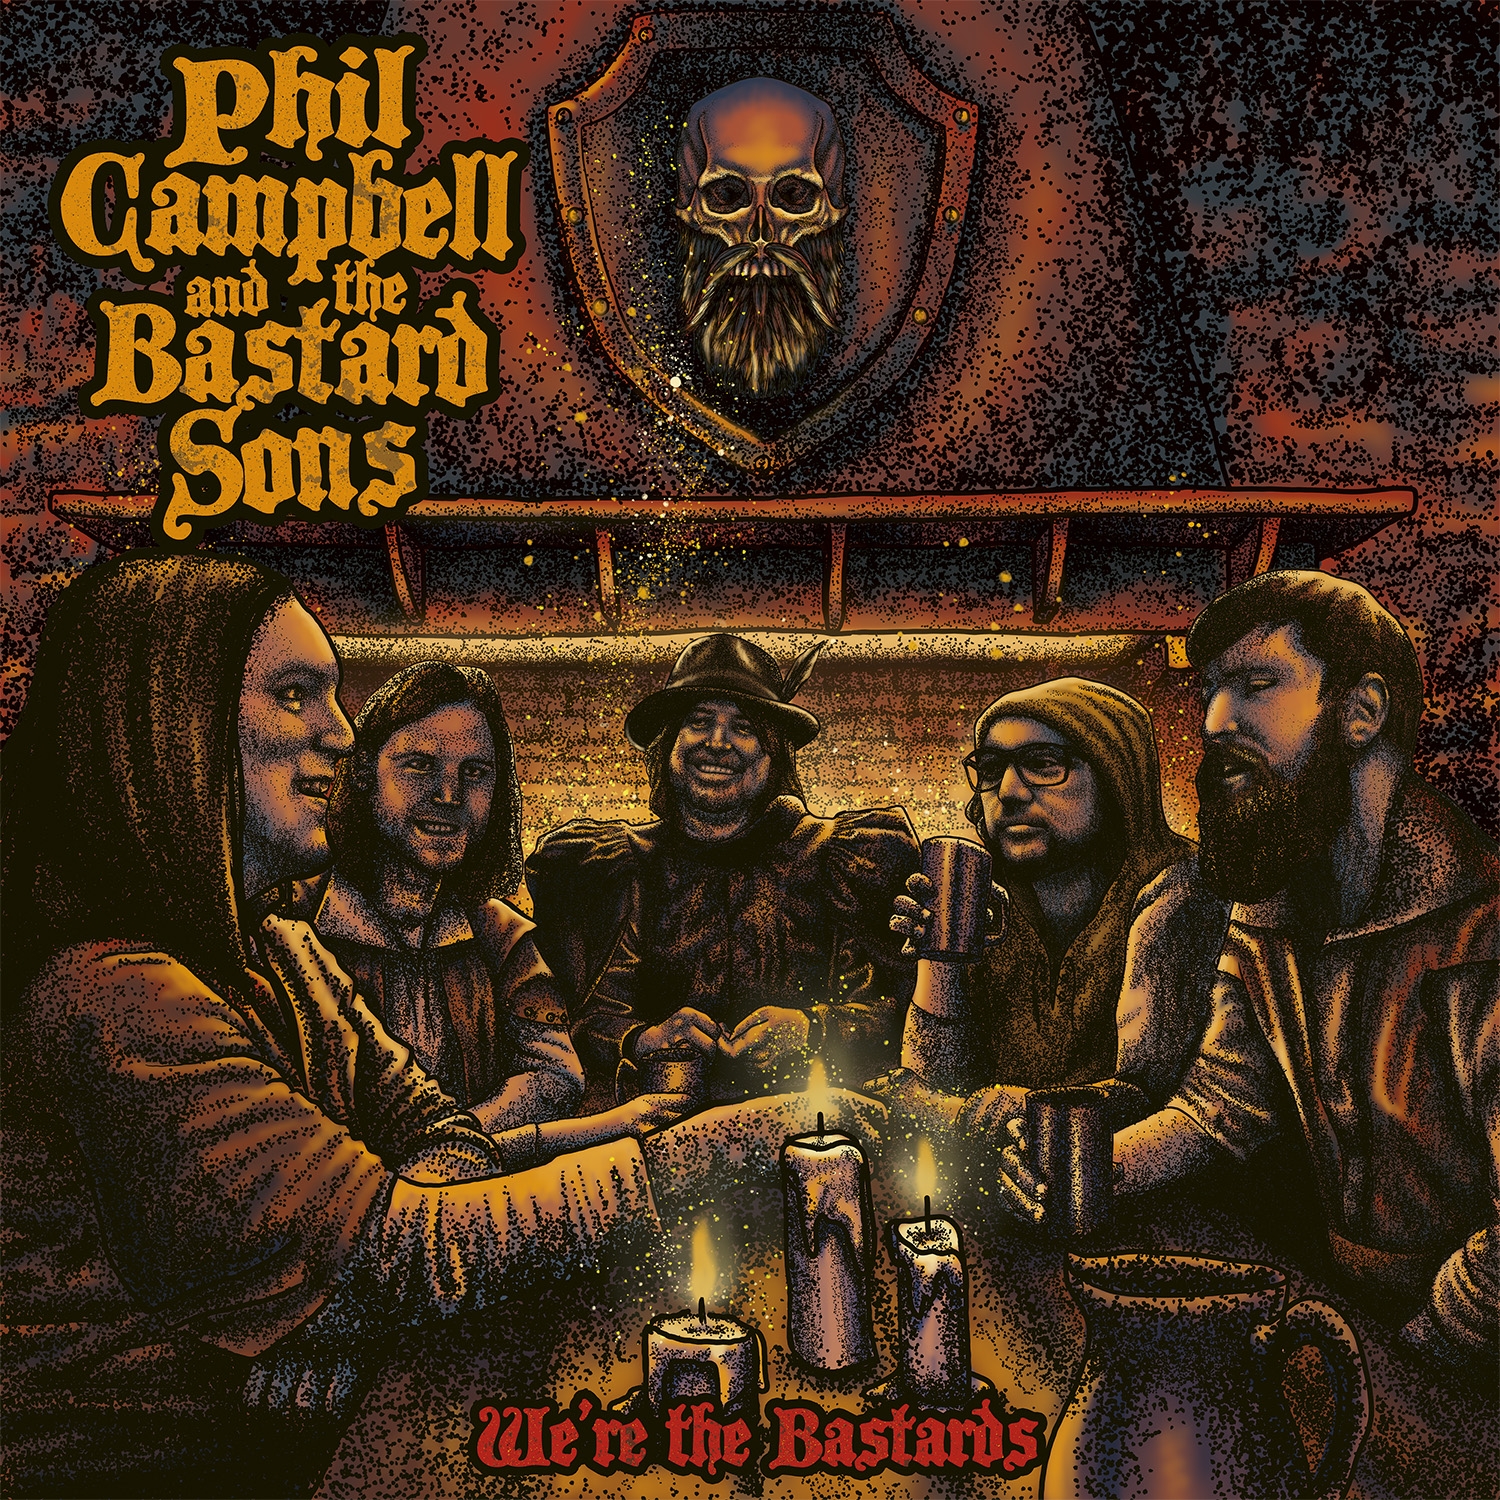 Phil Campbell & The Bastard Sons (WAL) – We’re The Bastards